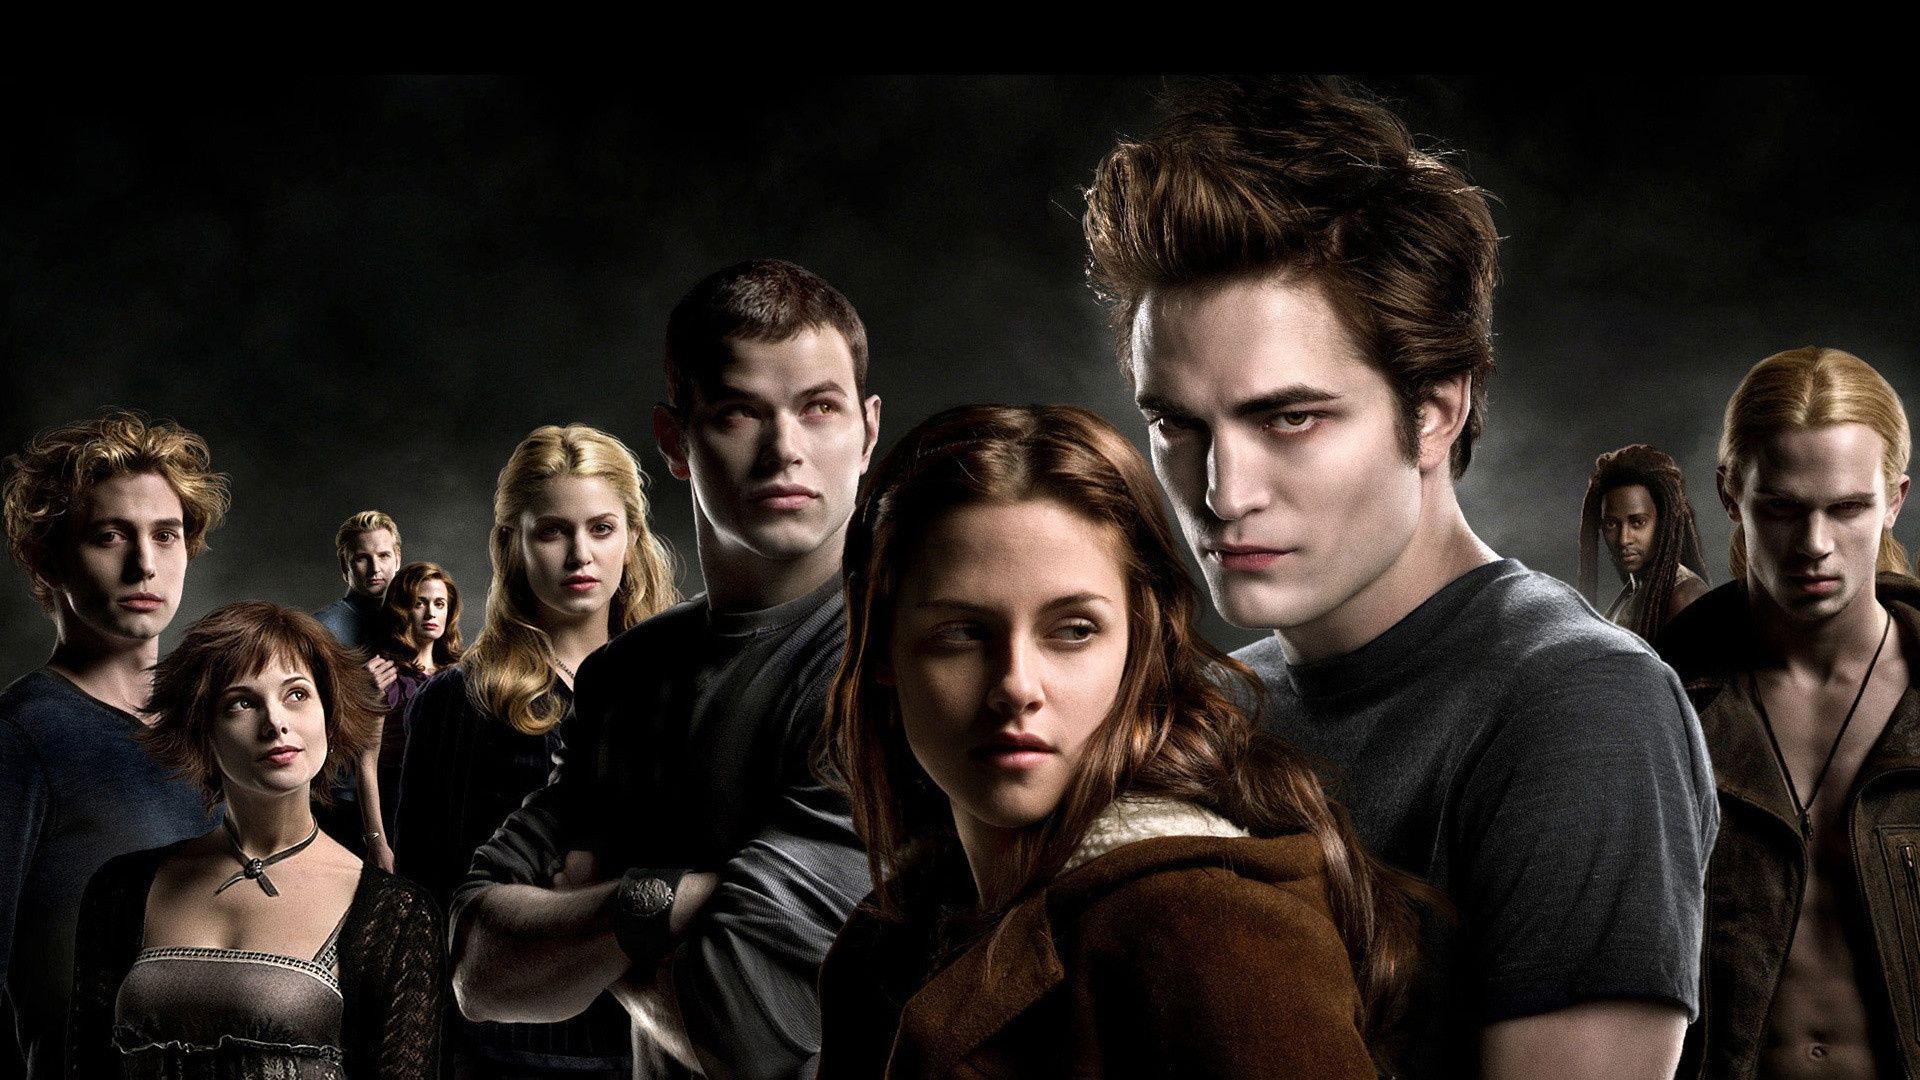 Wallpapers Tagged With TWILIGHT | TWILIGHT HD Wallpapers | Page 2